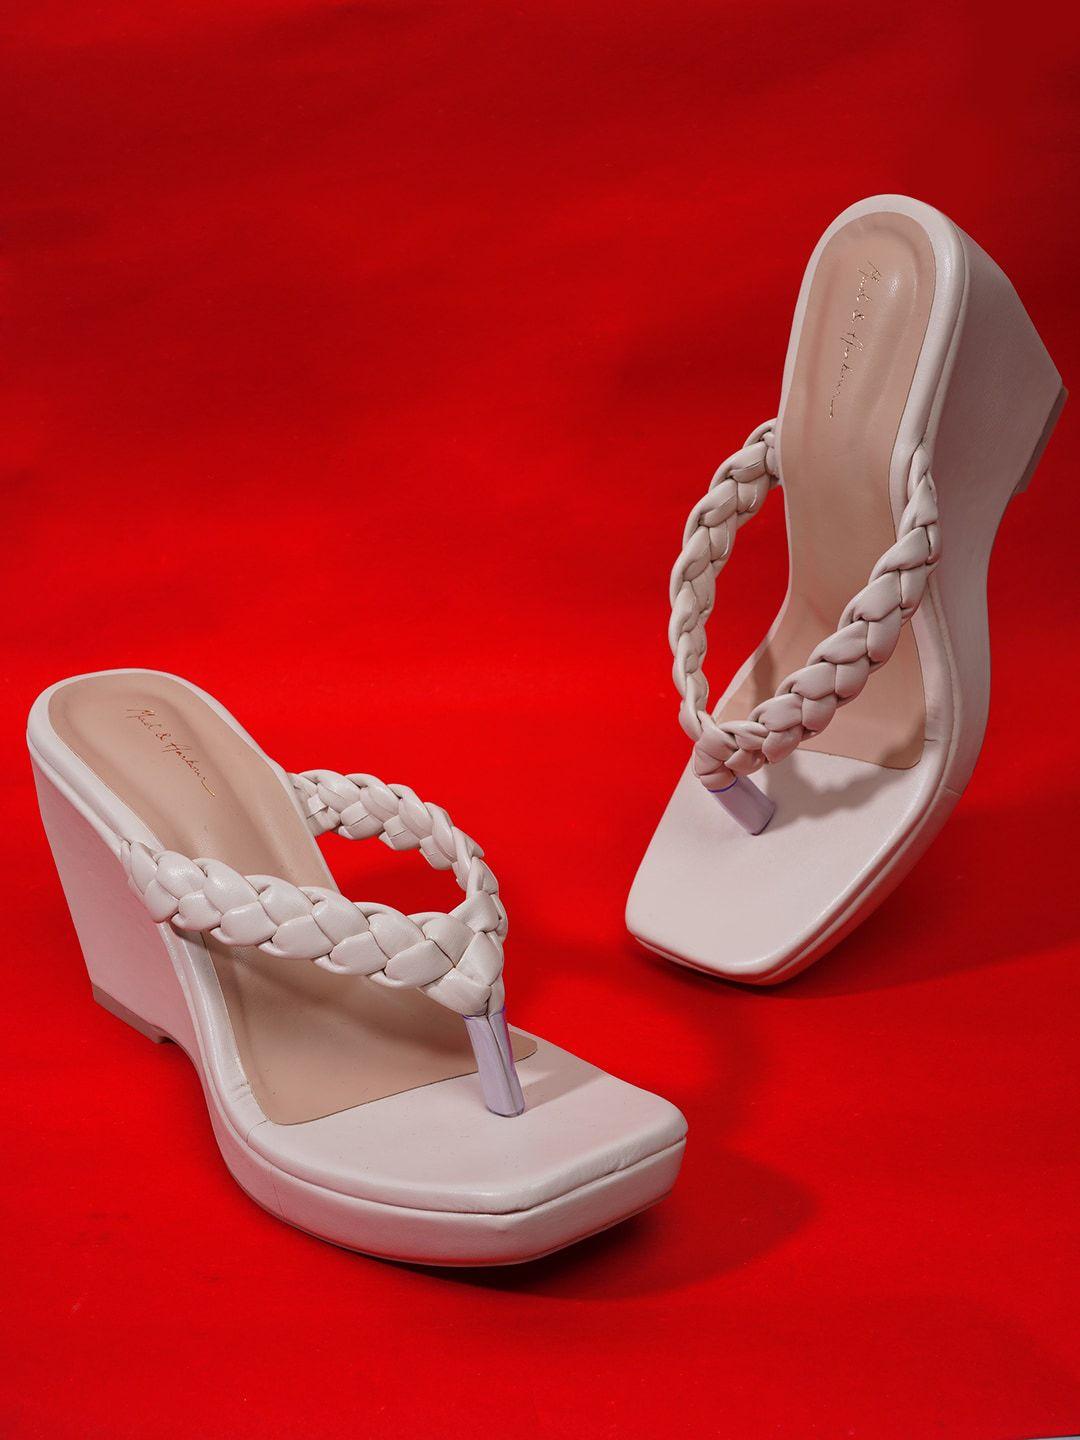 mast & harbour cream -colored braided open toe wedges